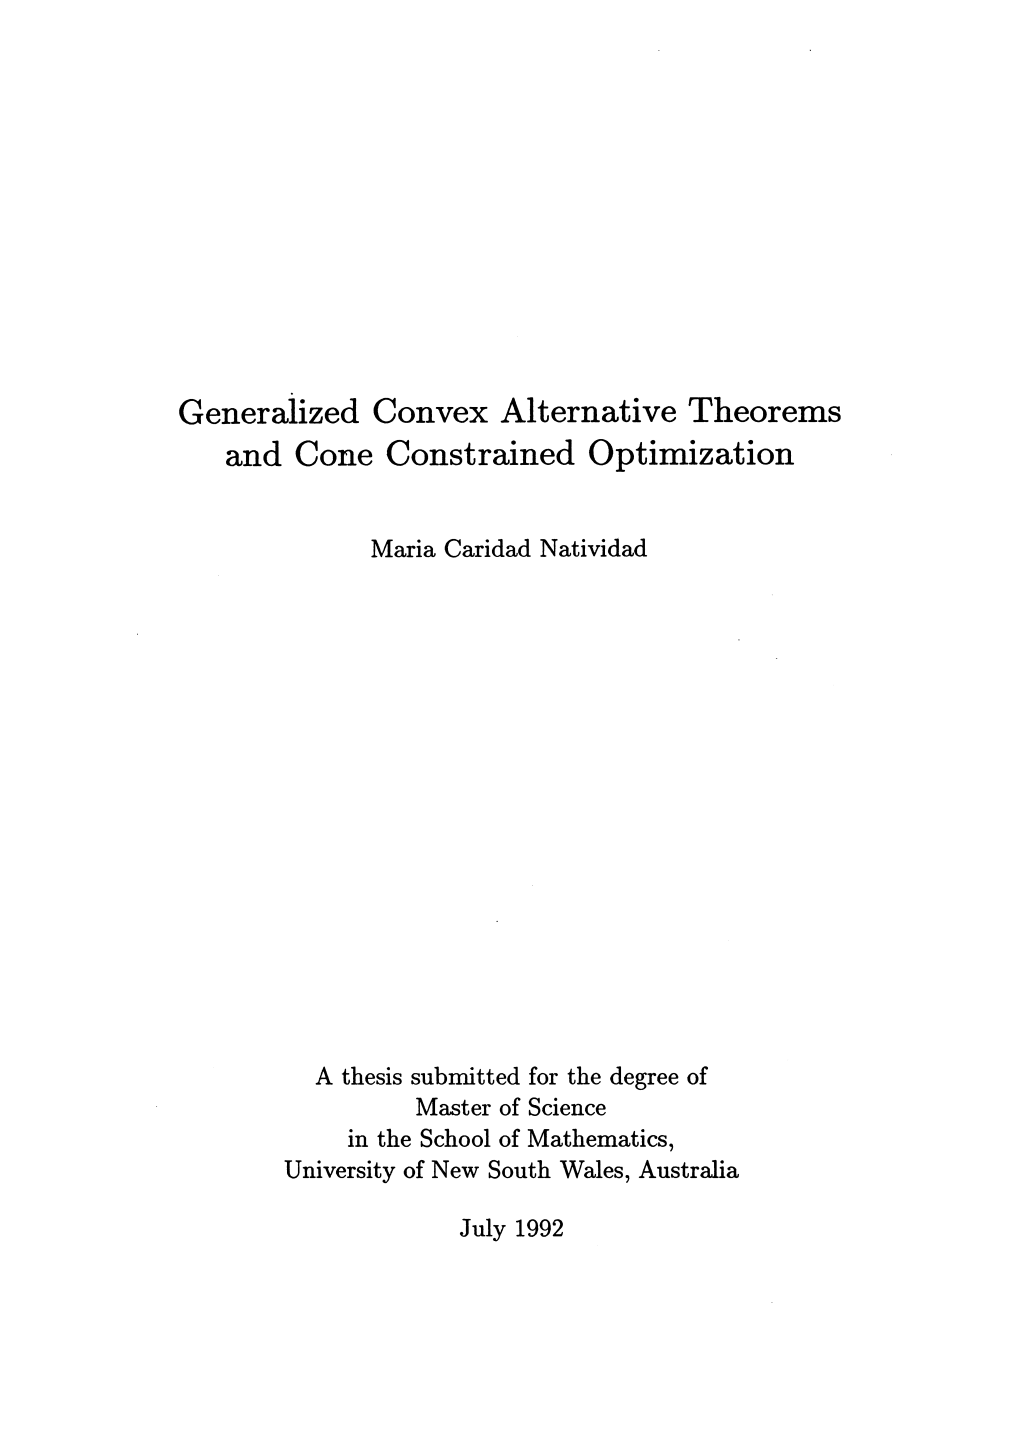 Generalized Convex Alternative Theorems and Cone Constrained Optimization